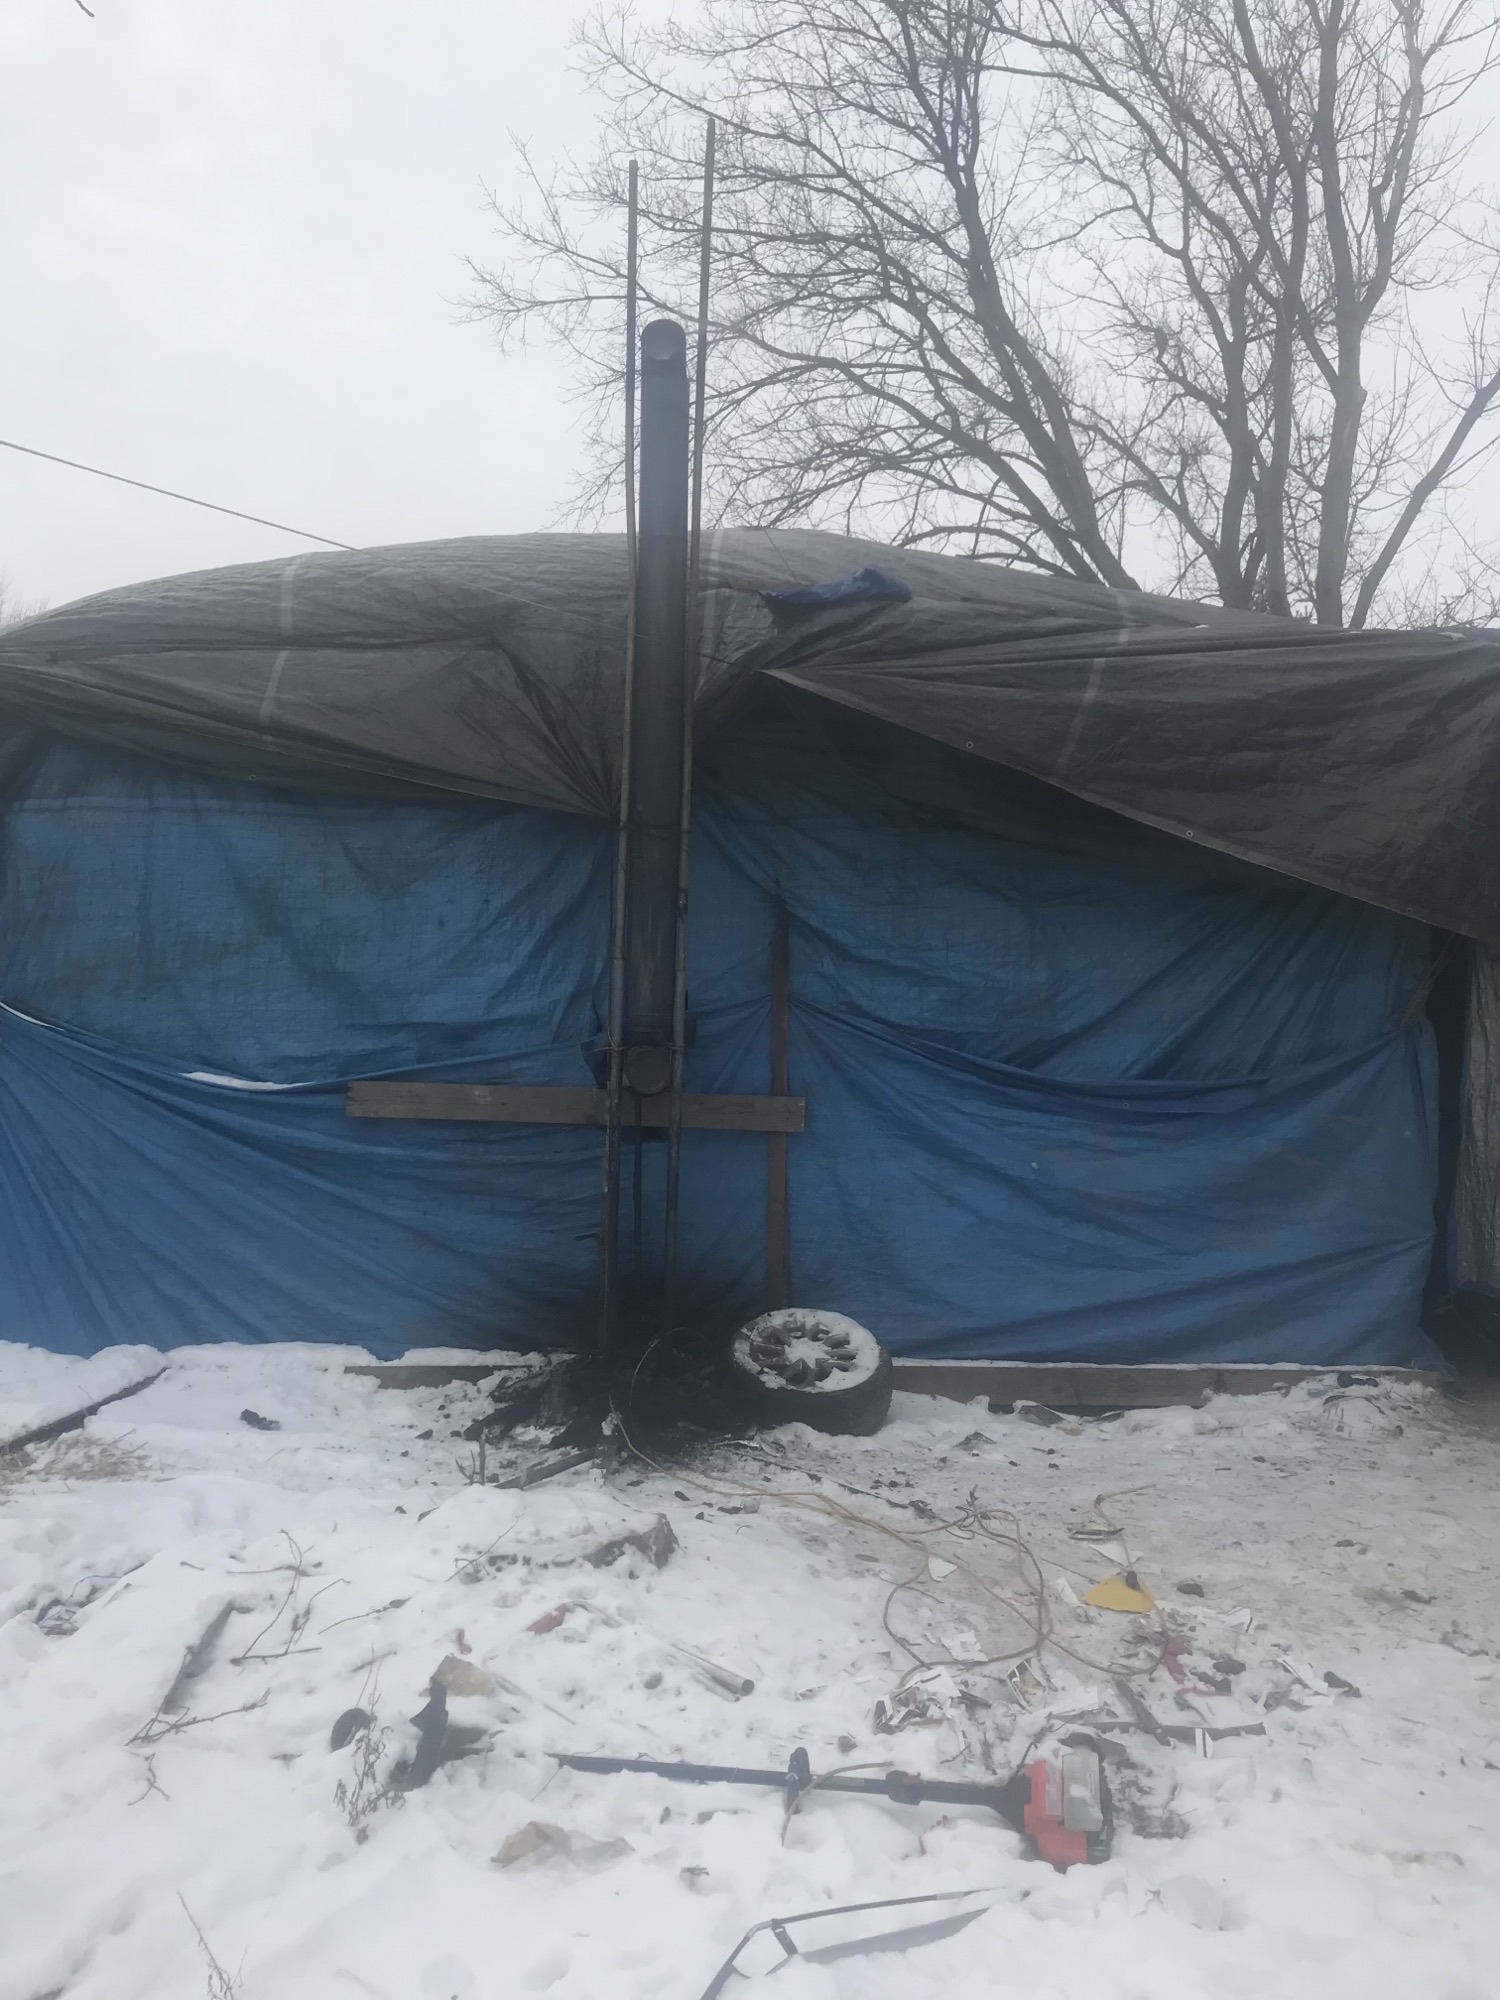 A house trailer, with several tarps snuggly attached, sitting in a snowy field.